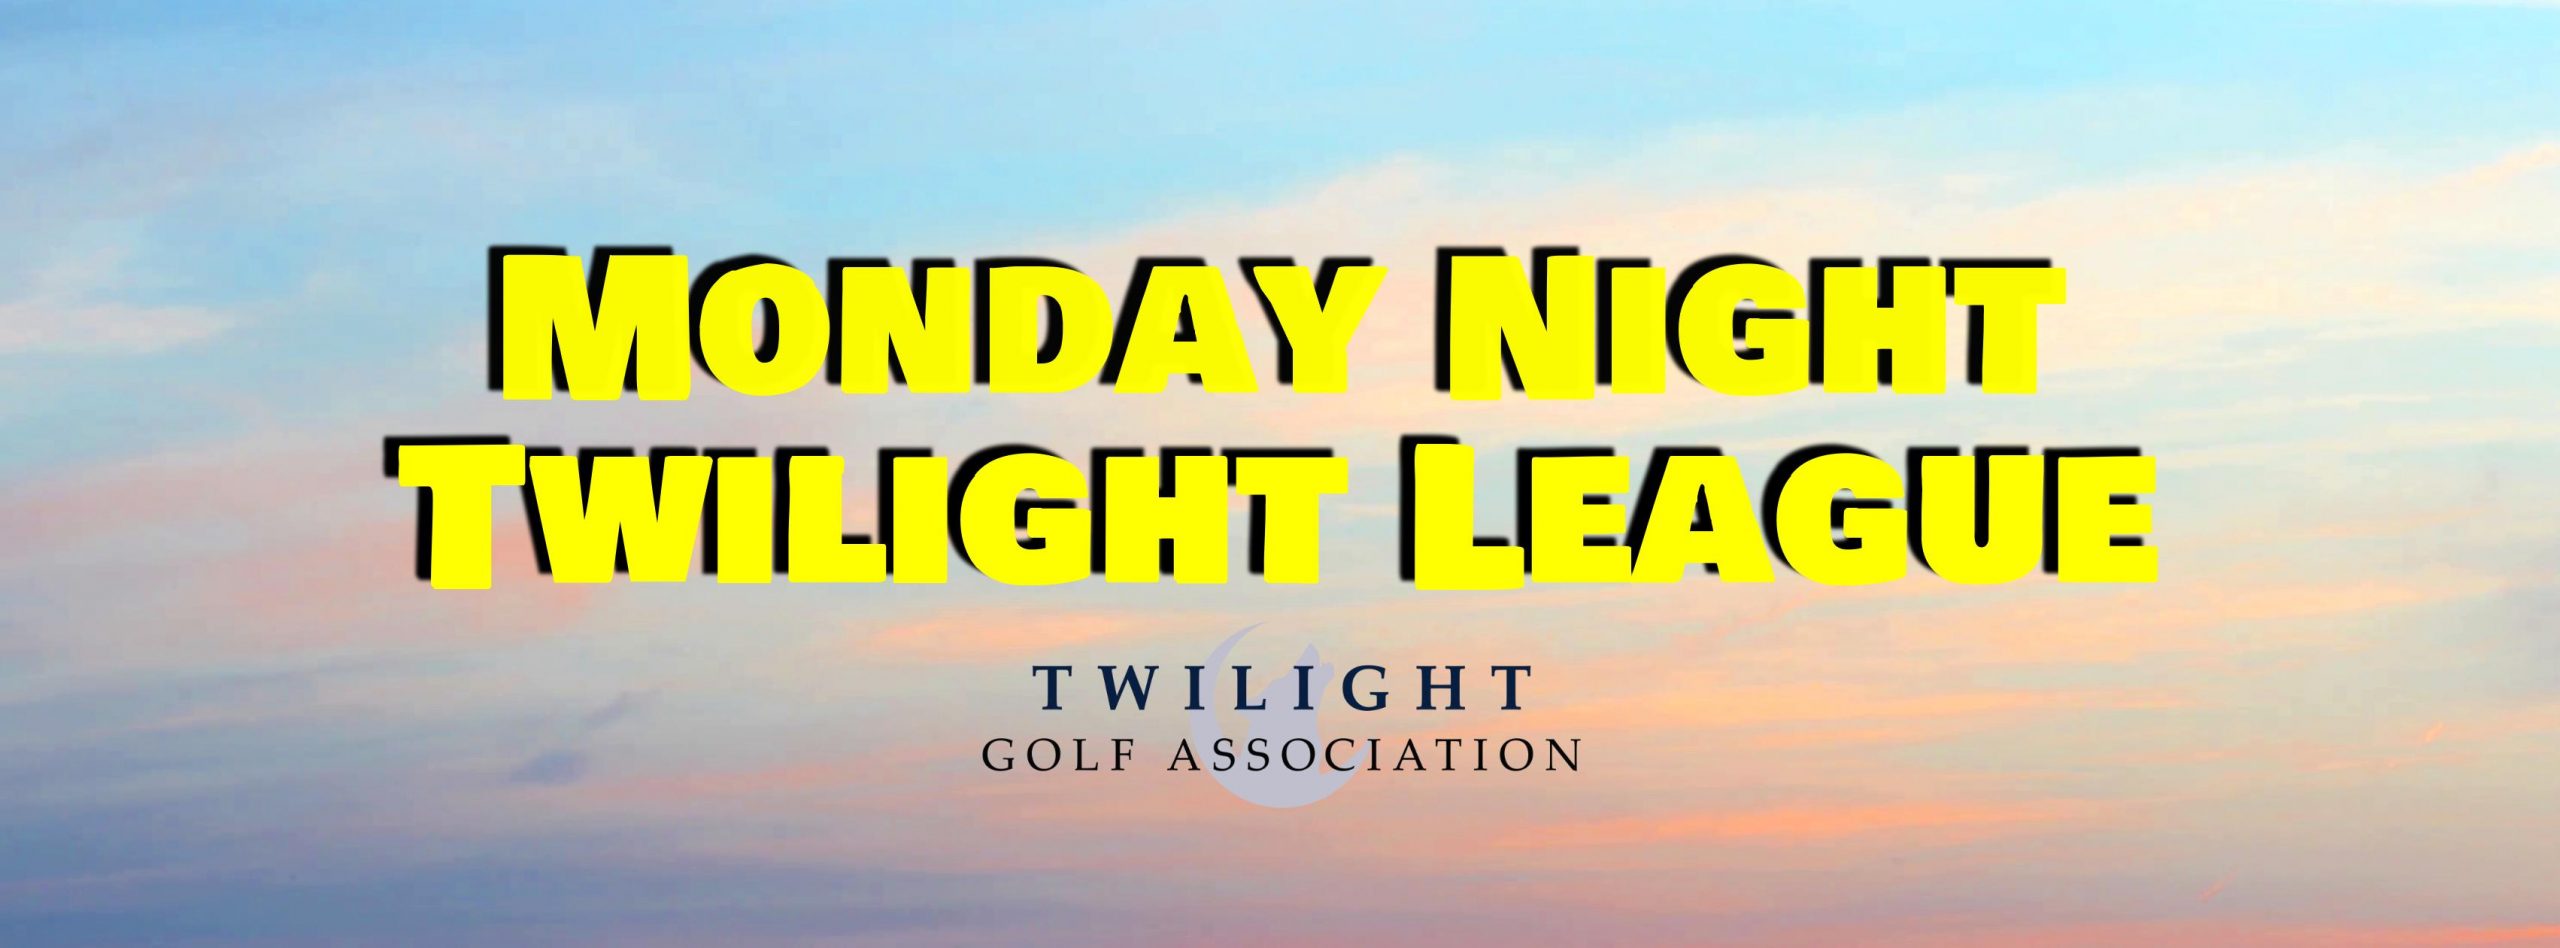 Monday Night Twilight League at Sawmill Golf Course